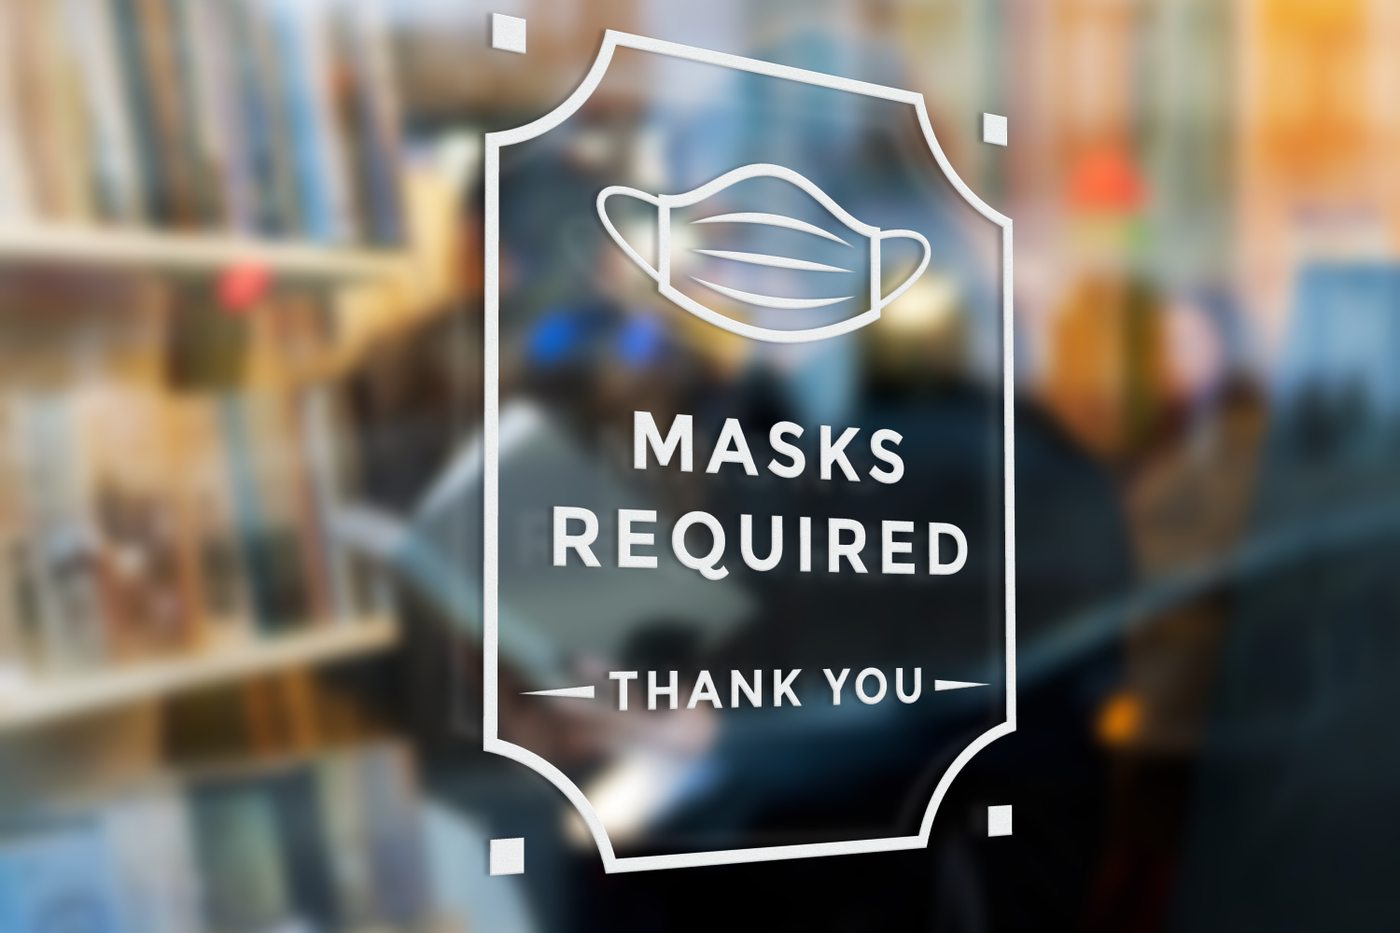 Masks required COVID sign